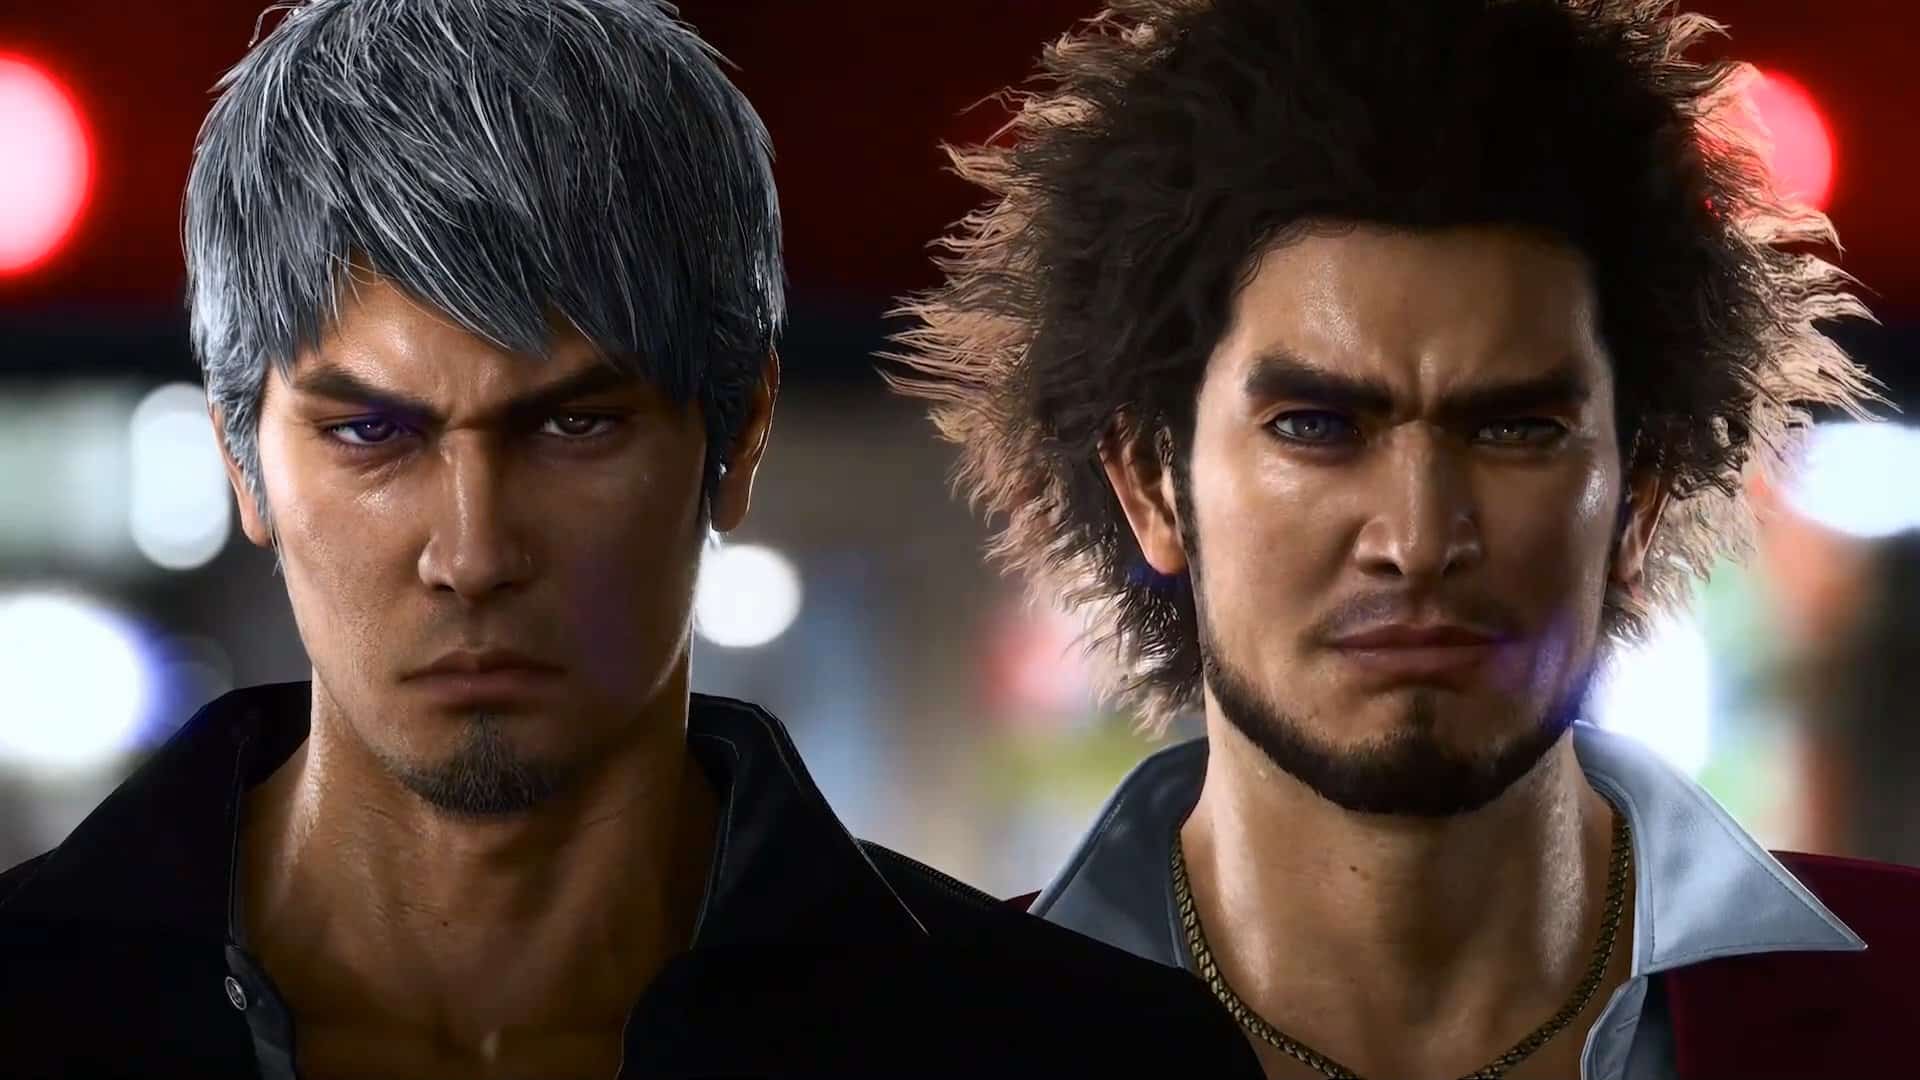 Yakuza 8 officially announced, now known as Like A Dragon 8